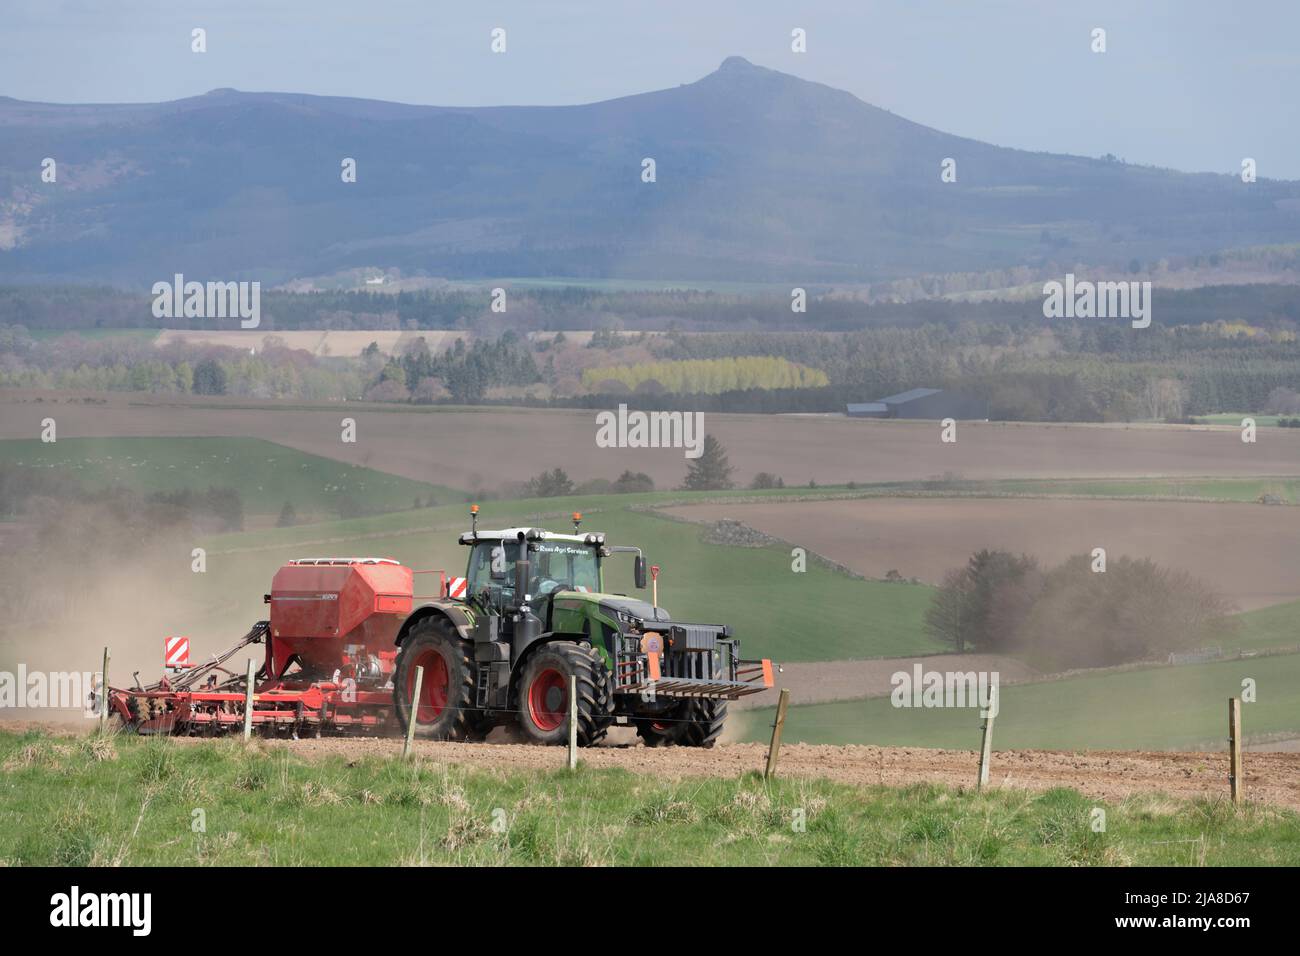 A Scenic View Over the Aberdeenshire Countryside Towards Bennachie with a Fendt Tractor and Disc Seed Drill Operating in the Foreground Stock Photo